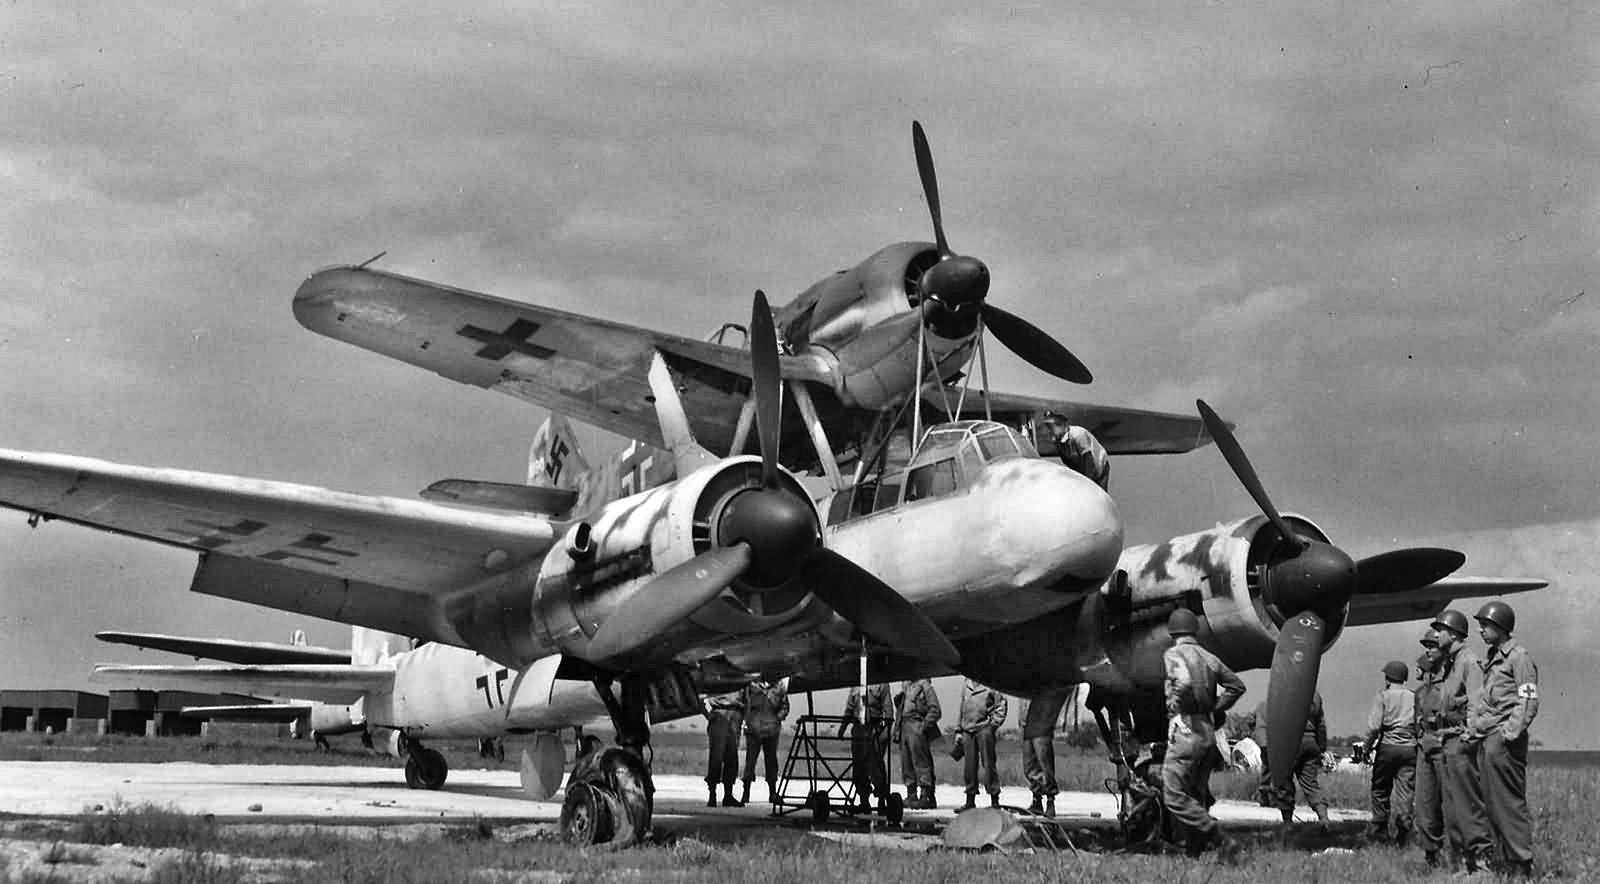 The Mistel composite aircraft consisted of an Fw-190 fighter attached to a Junkers Ju-88 bomber.  U.S. soldiers inspect this captured example at an airbase in Bernberg, Germany, in the spring of 1945.